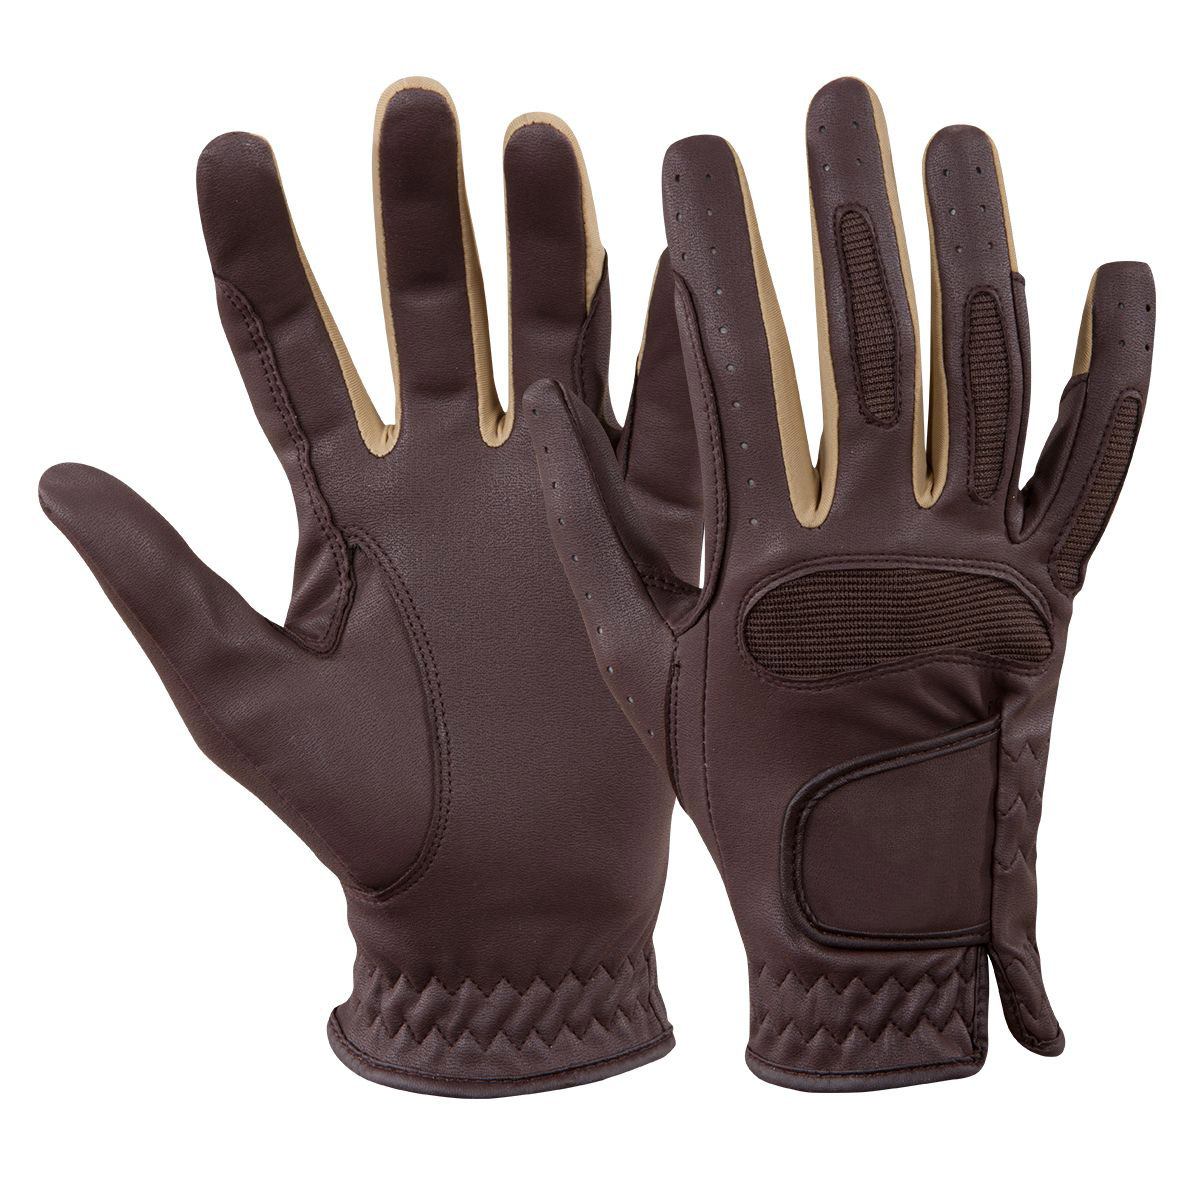 Synthetic leather horse Ride Gloves Equestrian gloves anti abrasion